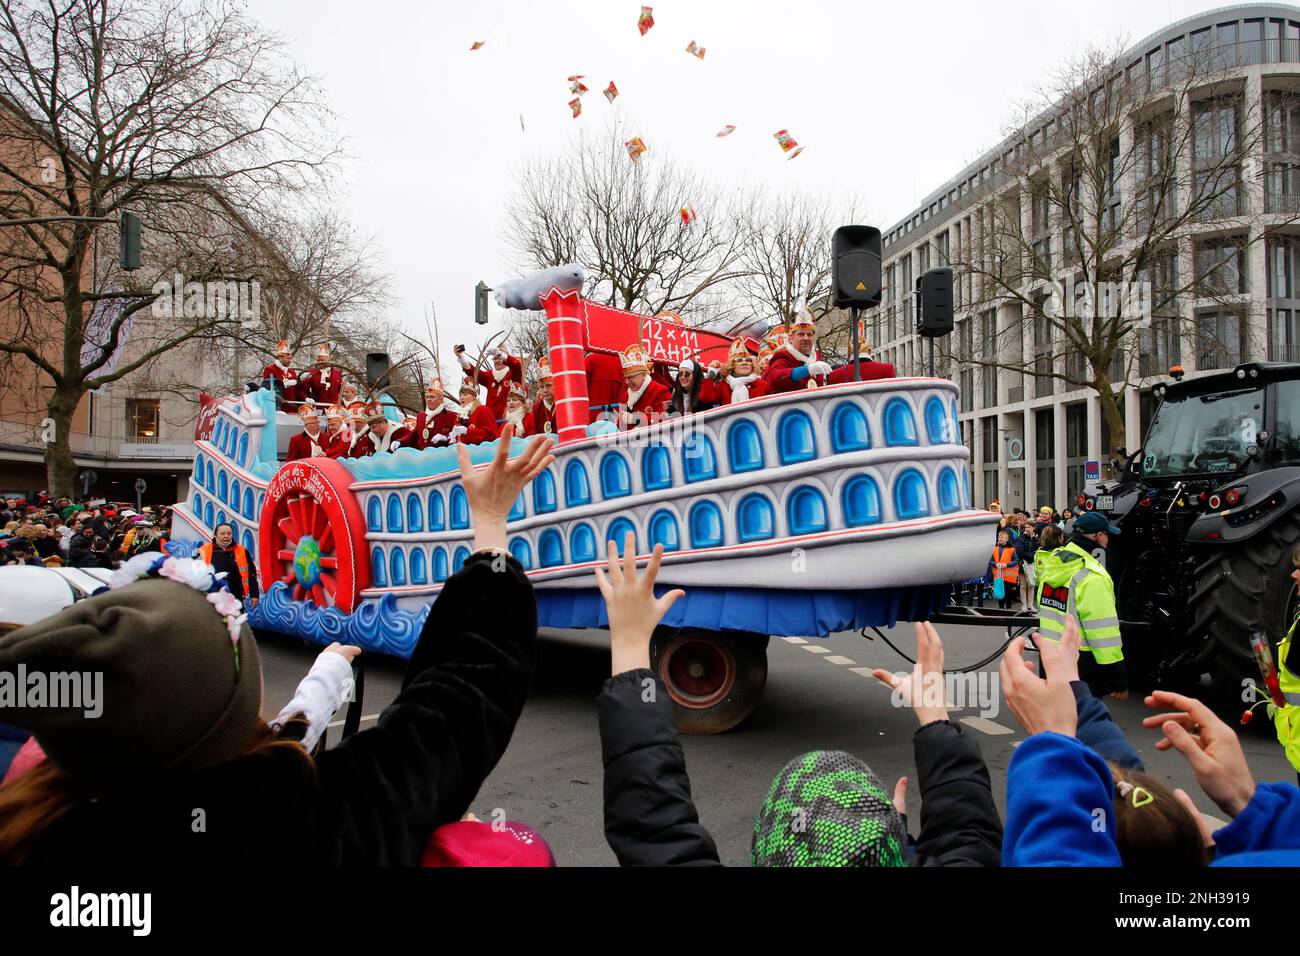 Crowds of many masked revelers cheer the Rose Monday parade in Düsseldorf Stock Photo